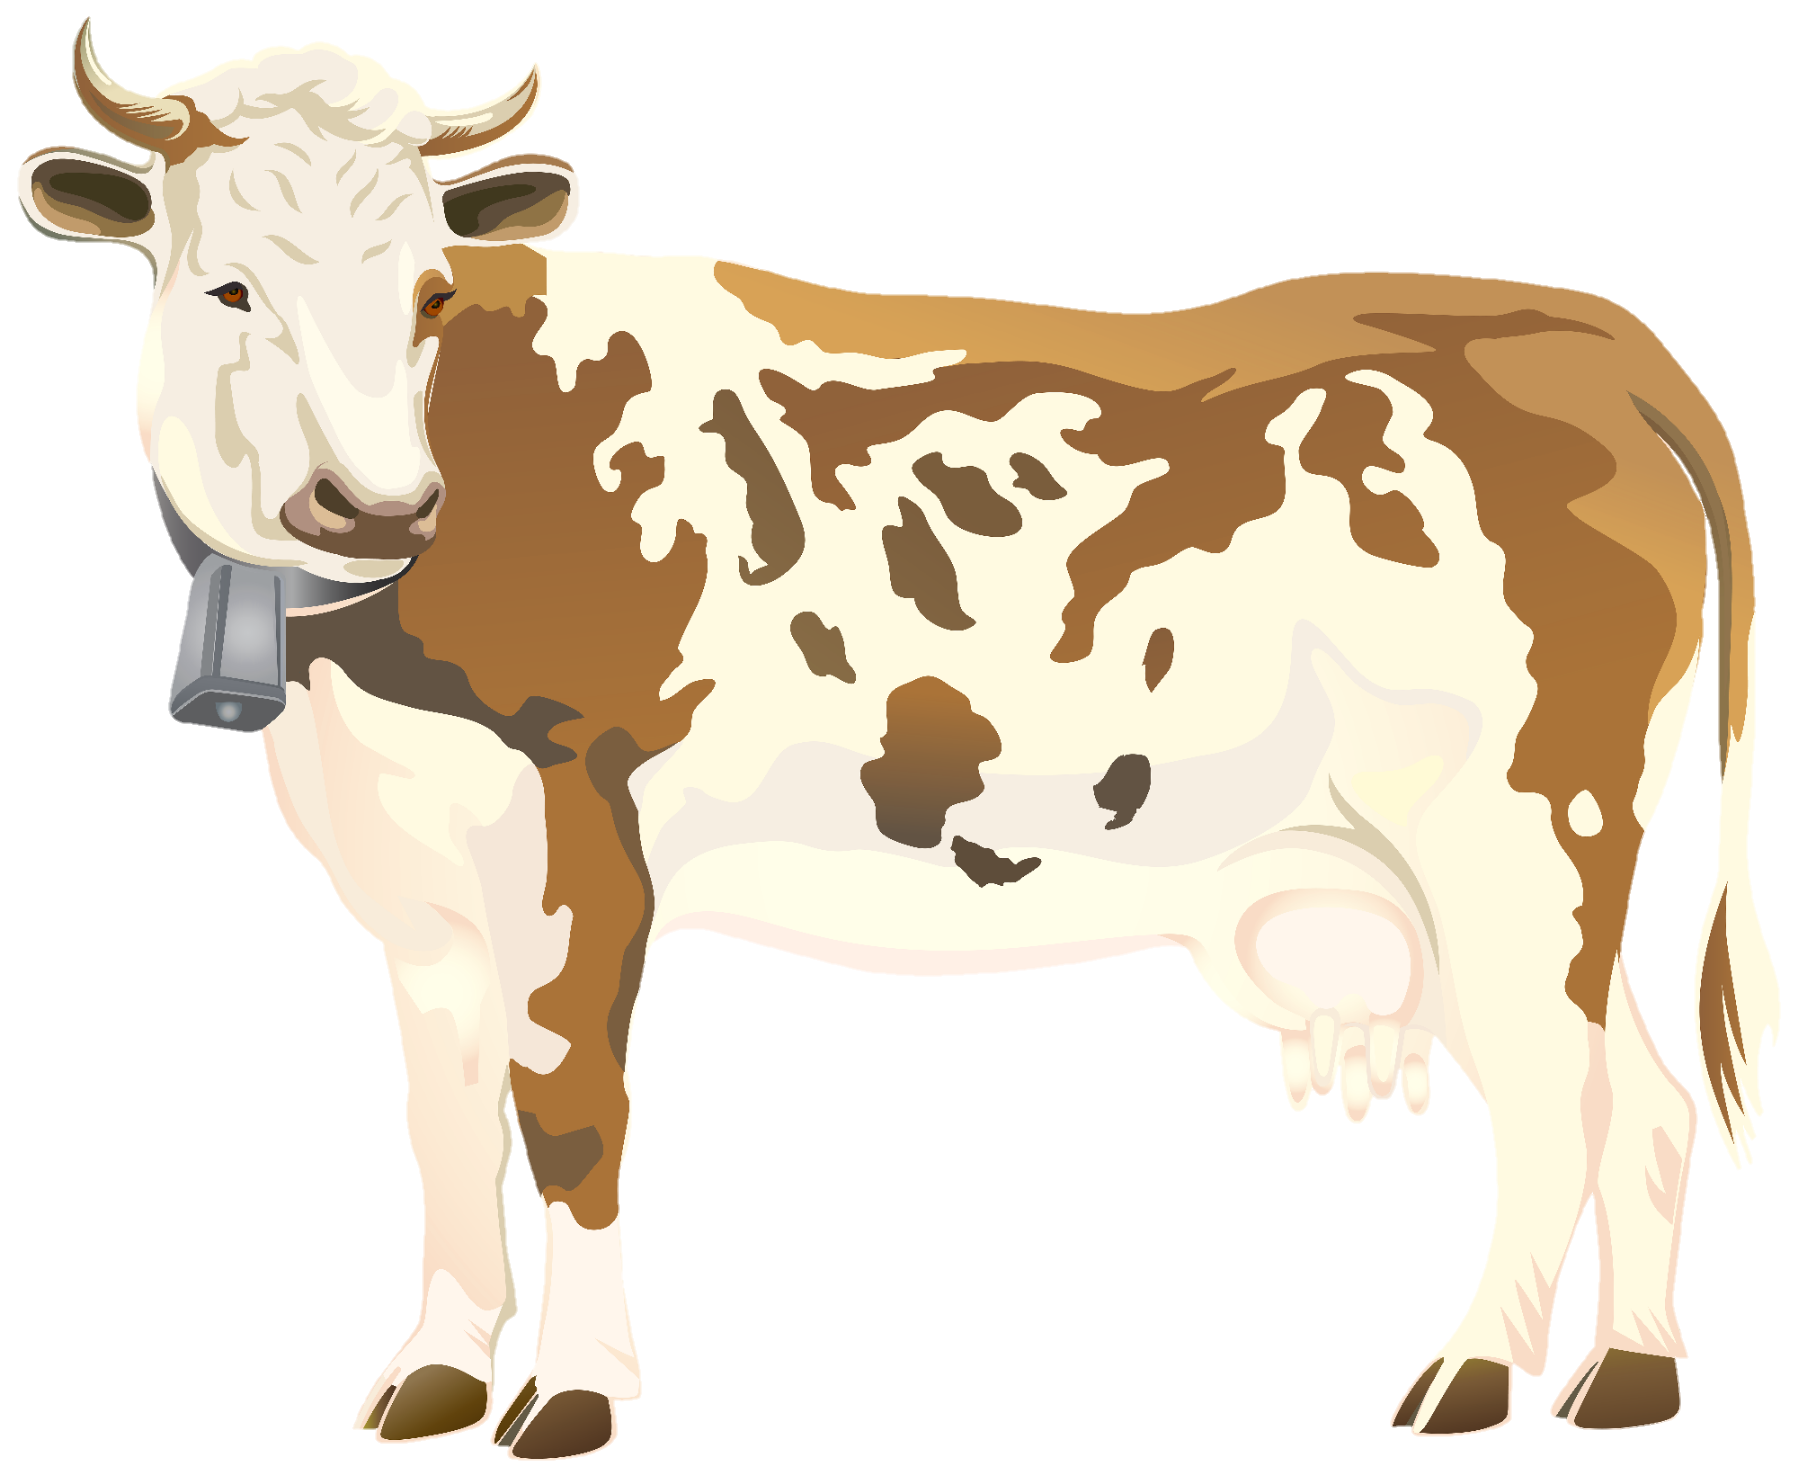 cow-png-from-pngfre-3